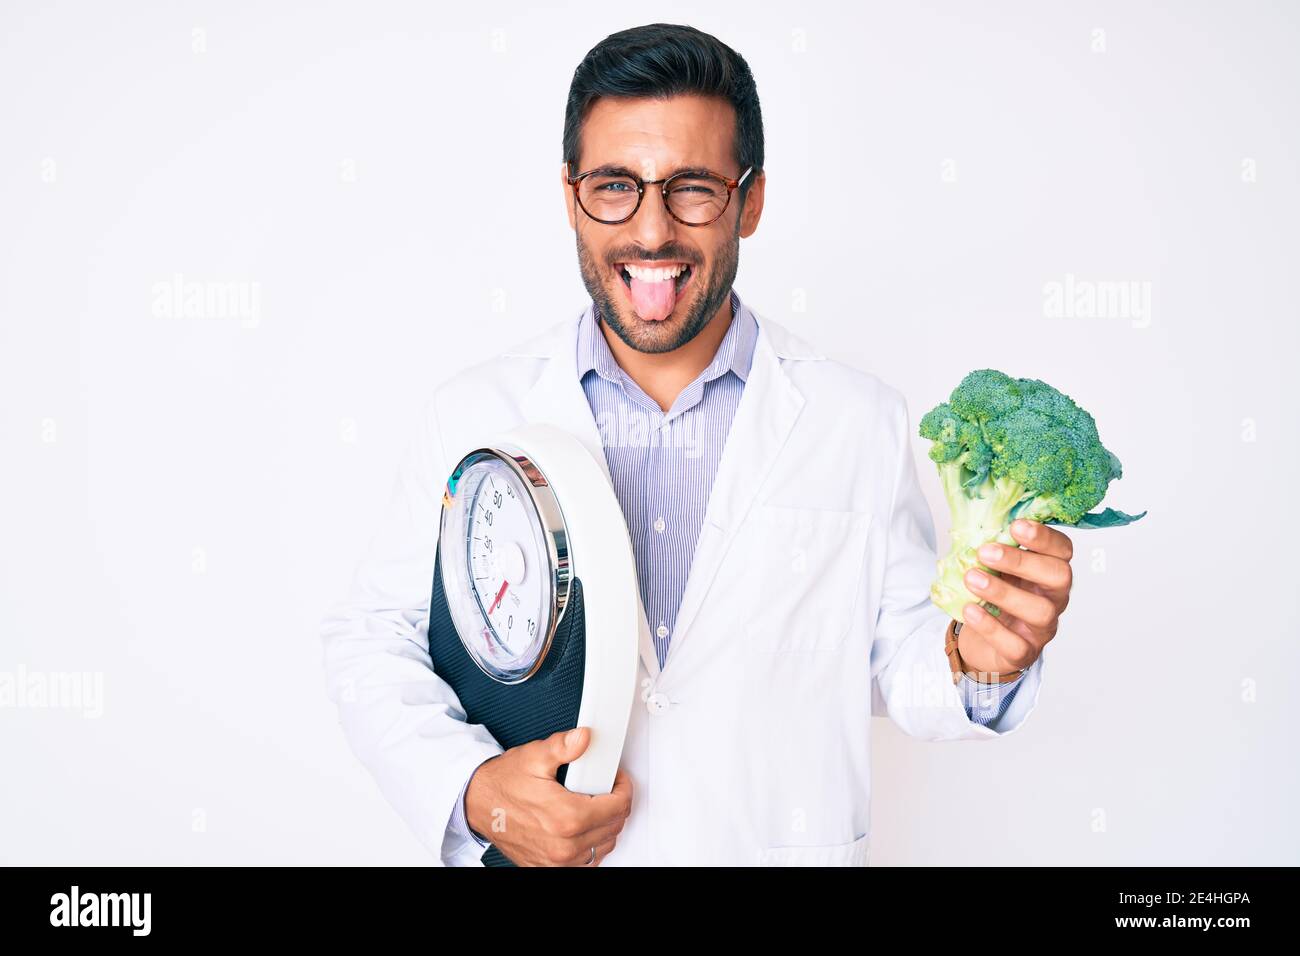 Young hispanic man as nutritionist doctor holding weighing machine and broccoli sticking tongue out happy with funny expression. Stock Photo